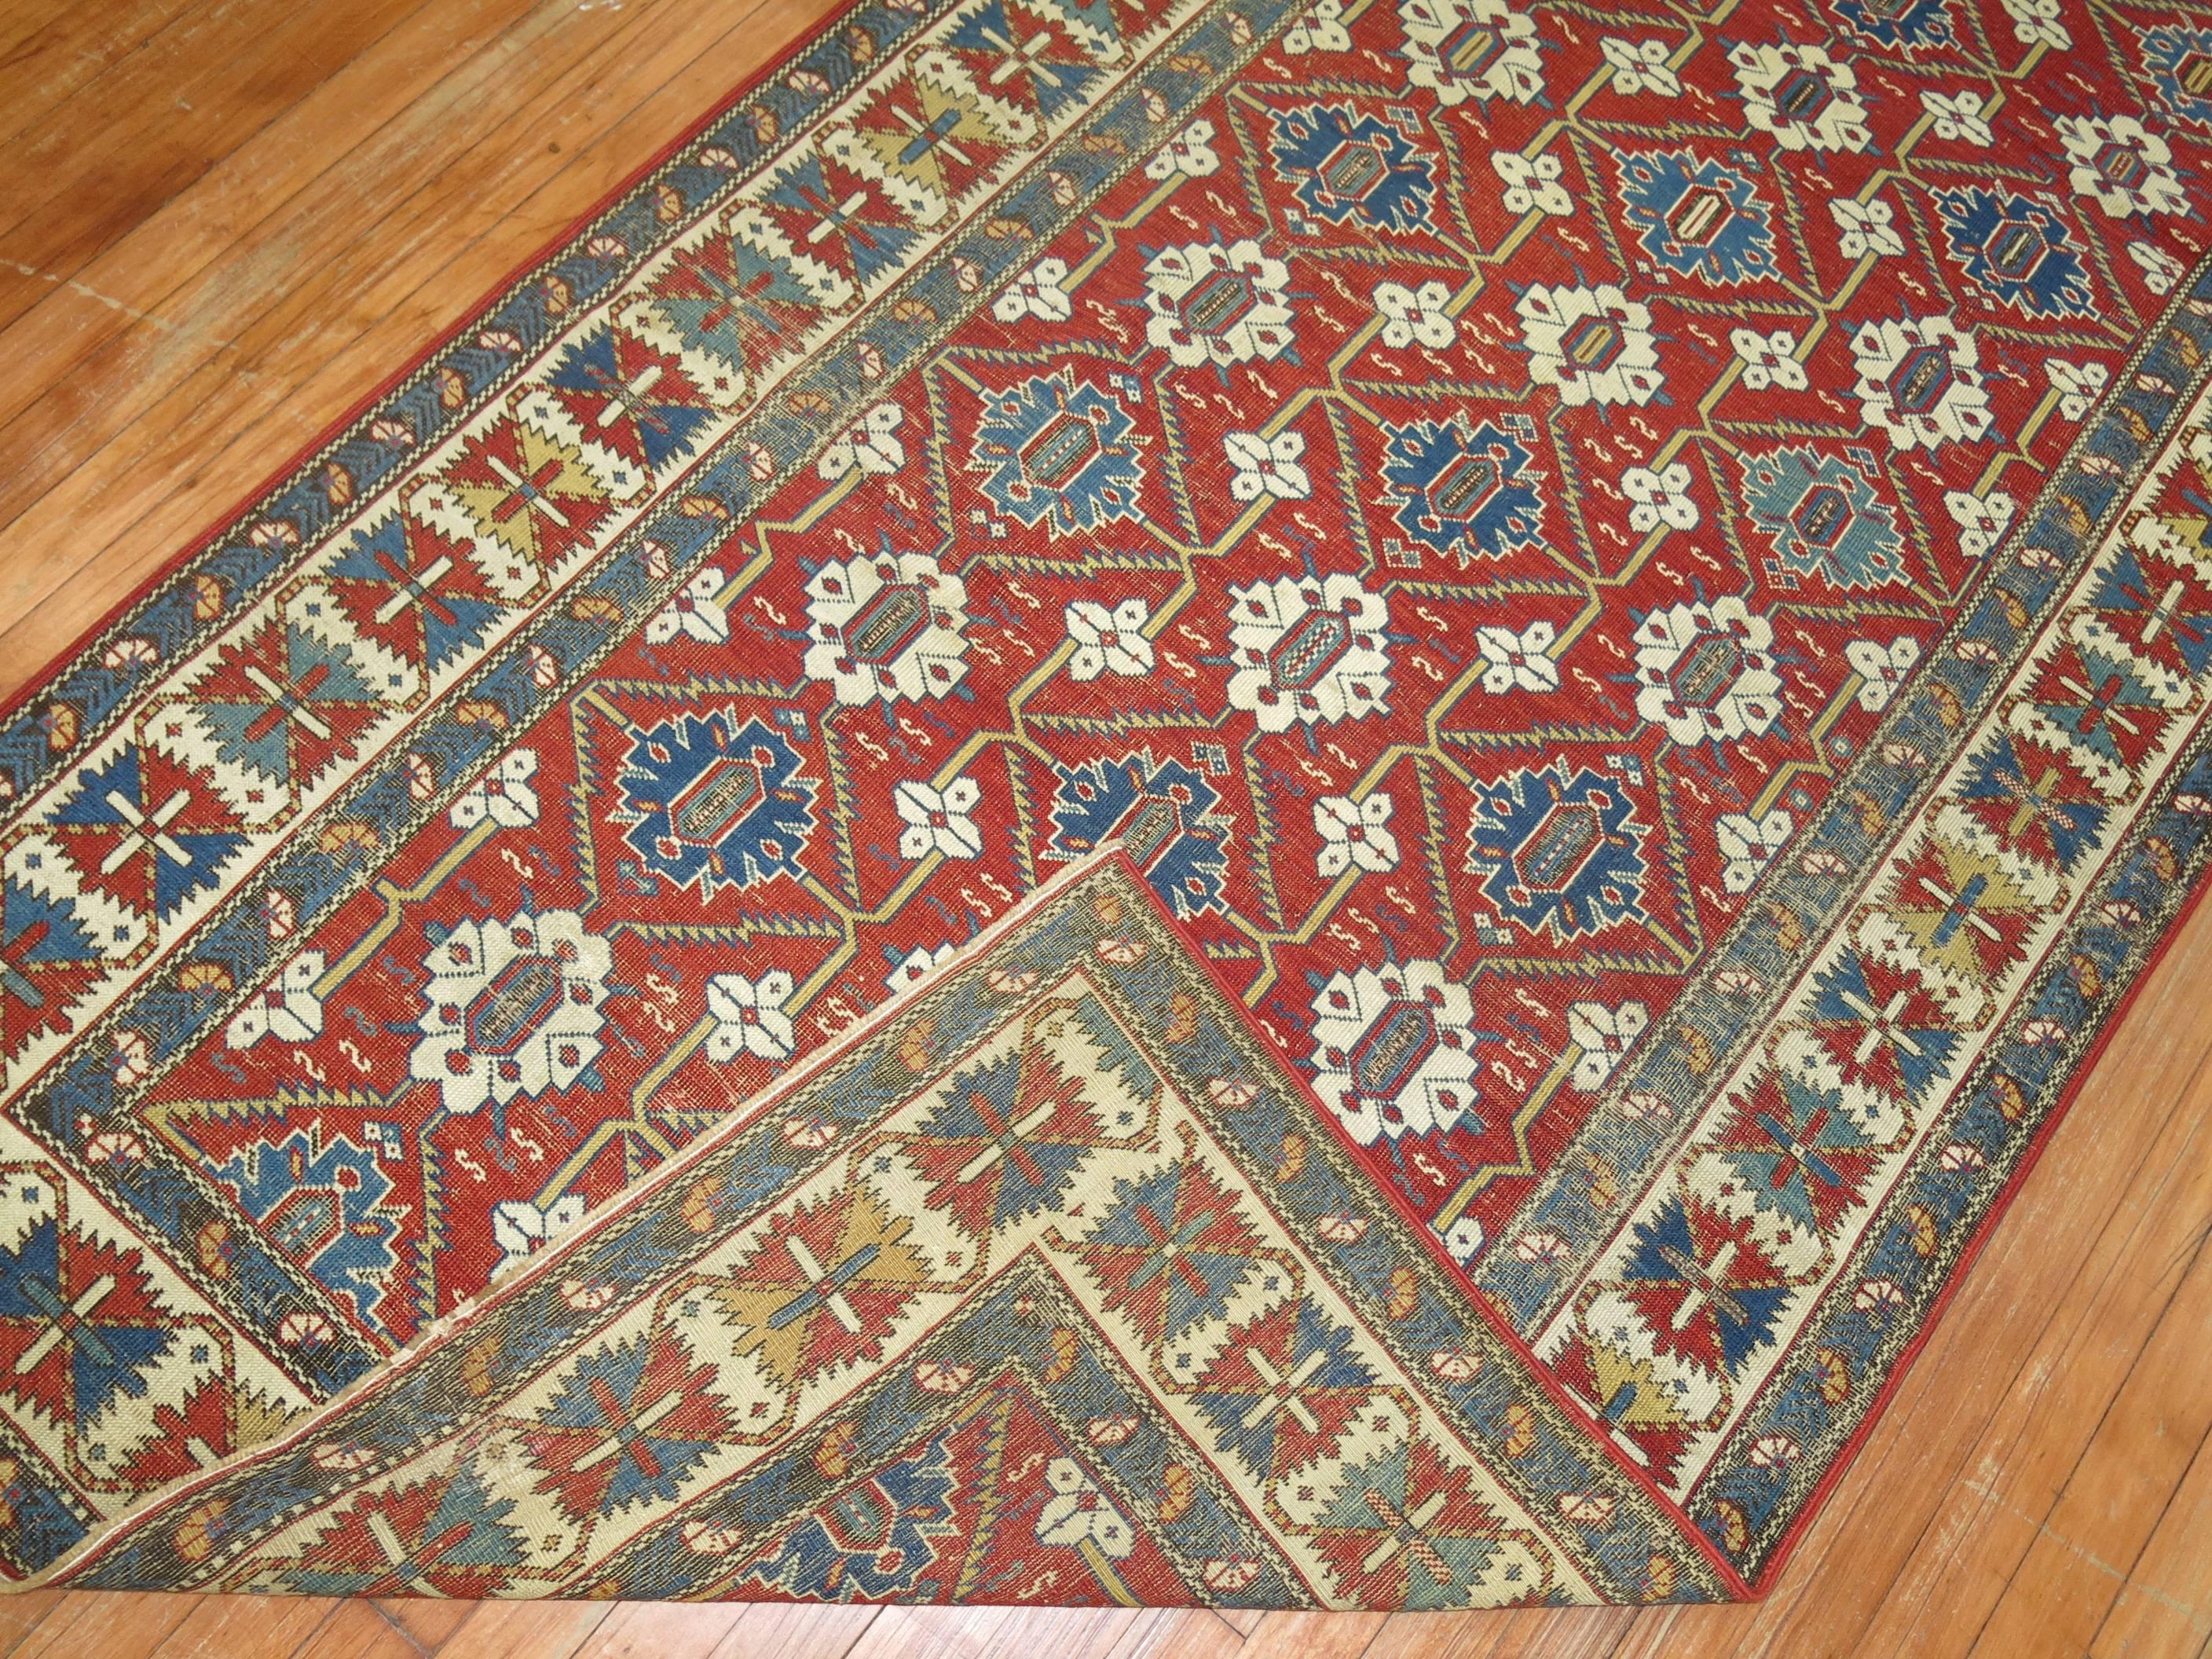 Super fine quality 19th century antique Shirvan rug. Blue, green and ivory accents on a rich red field


Measure: 4' x 7'9